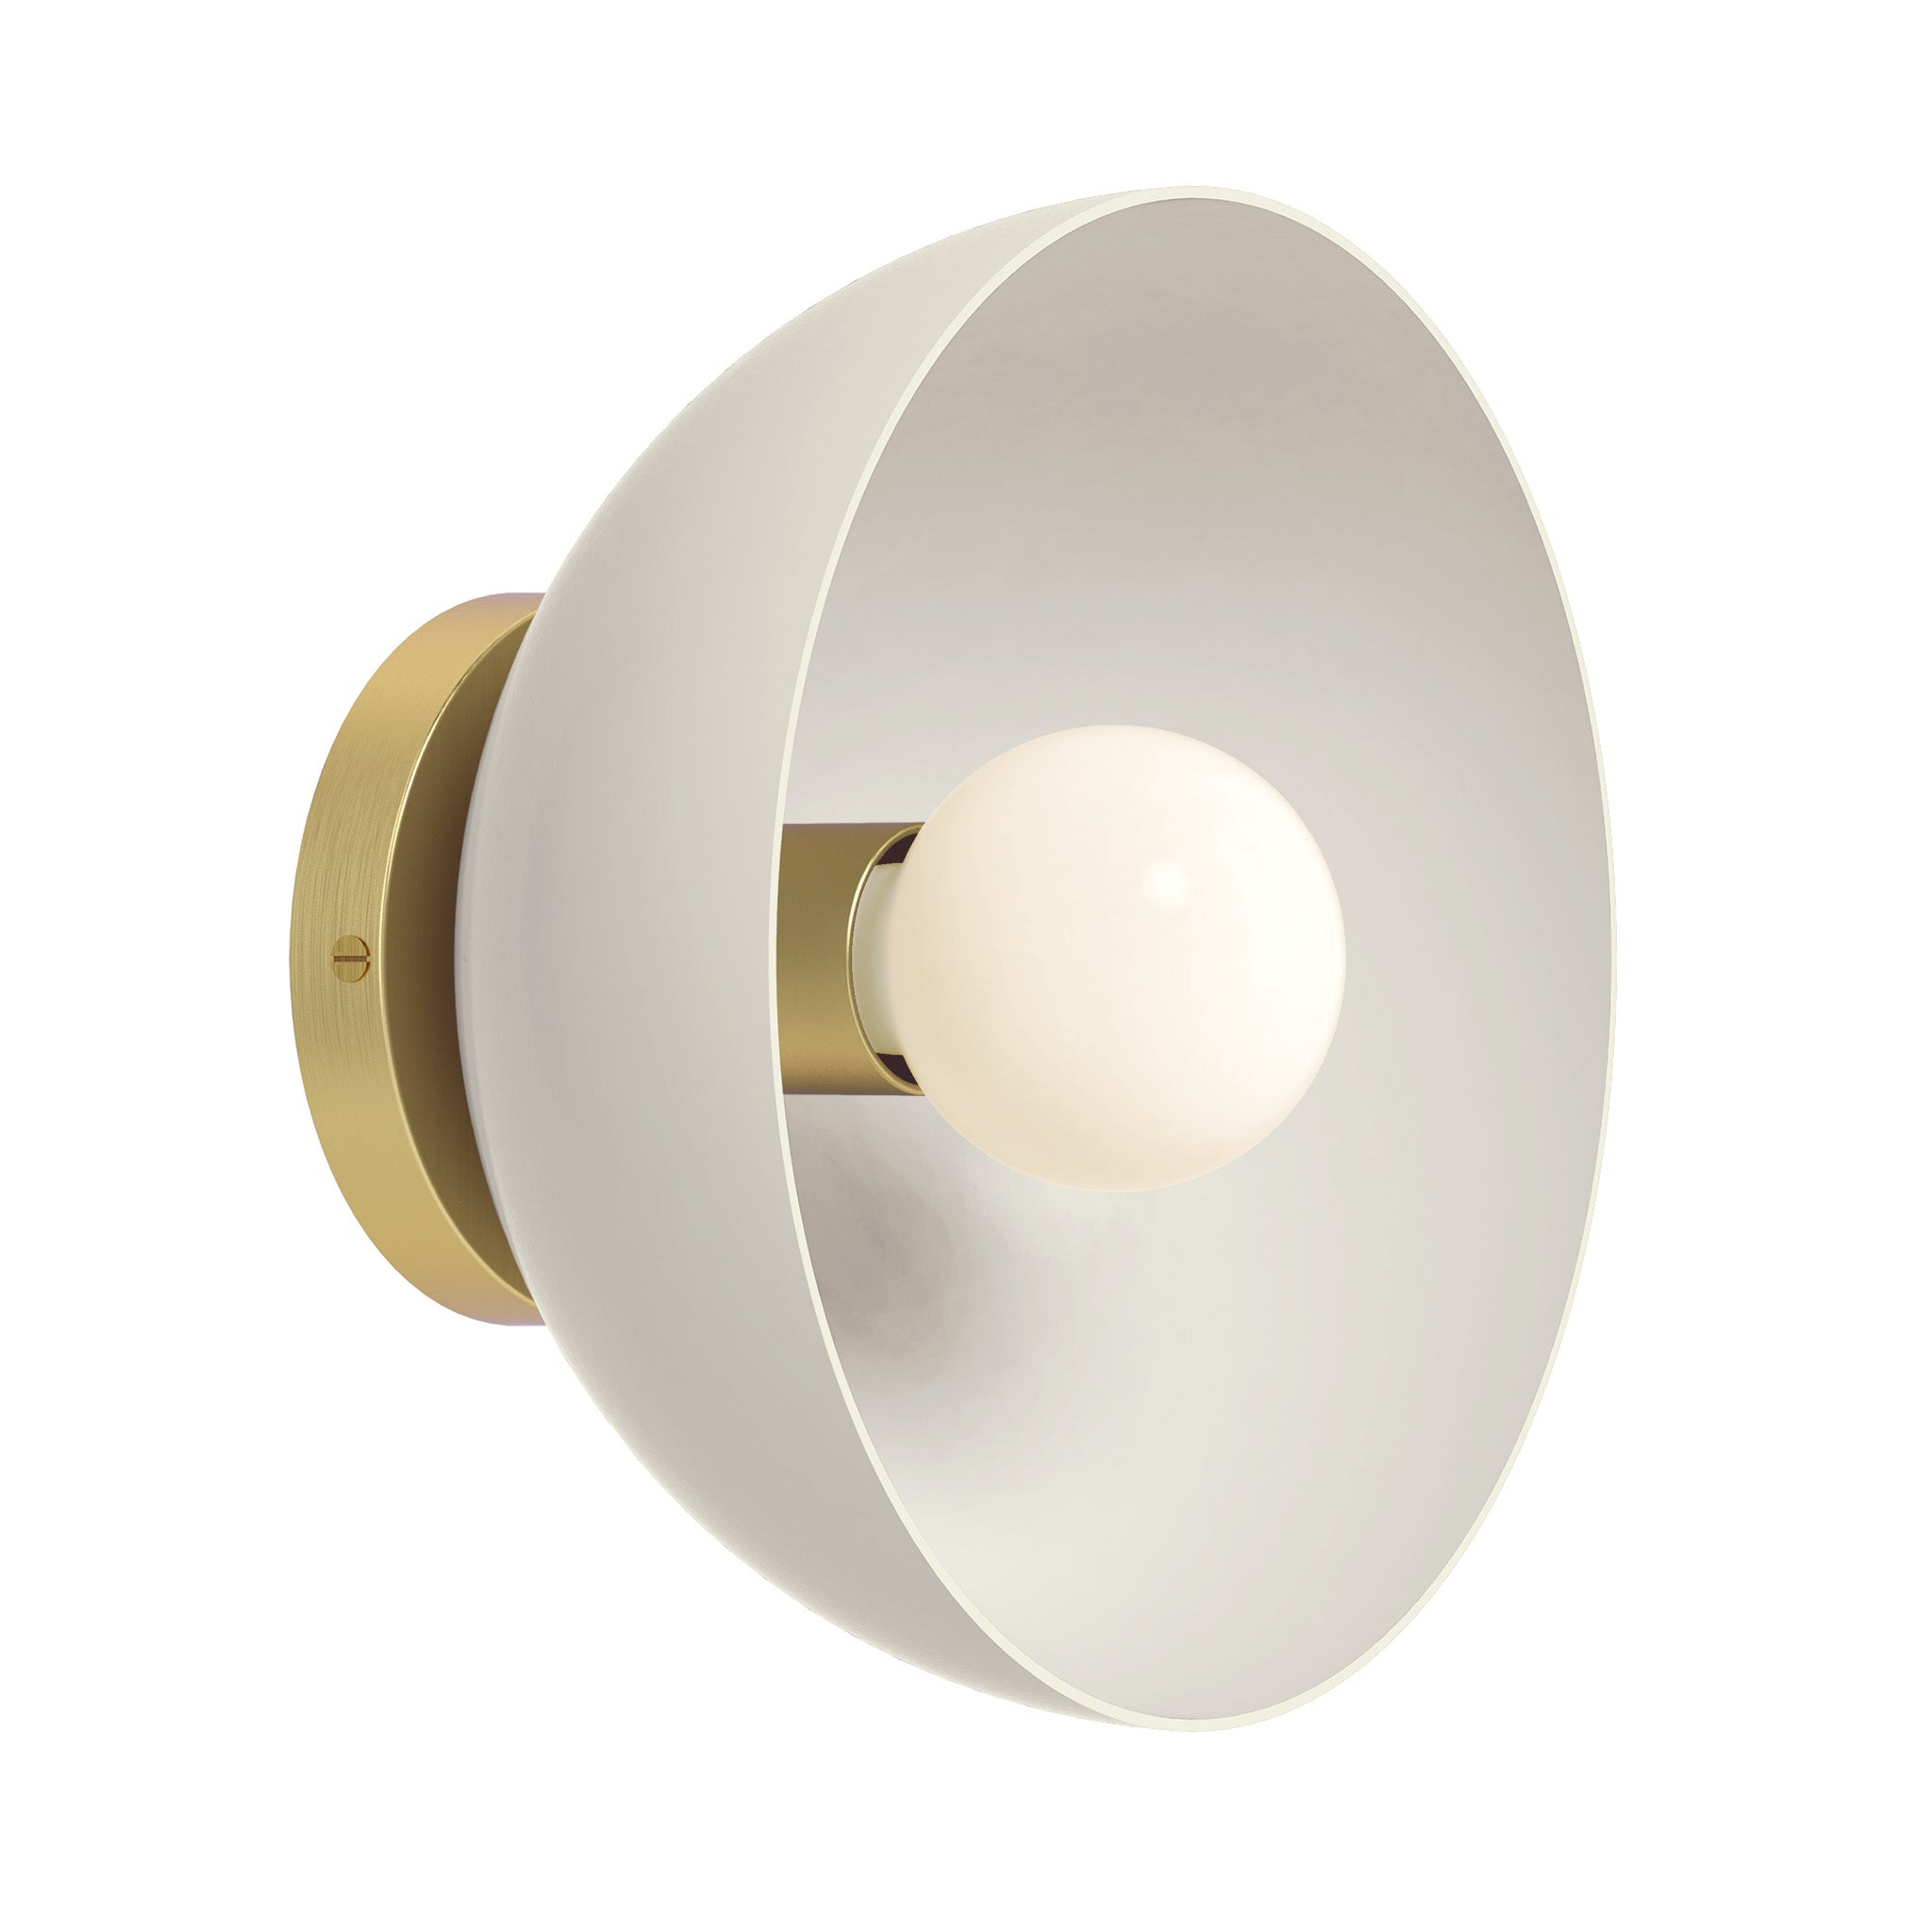 Brass and bone color hemi dome sconce 10" Dutton Brown lighting